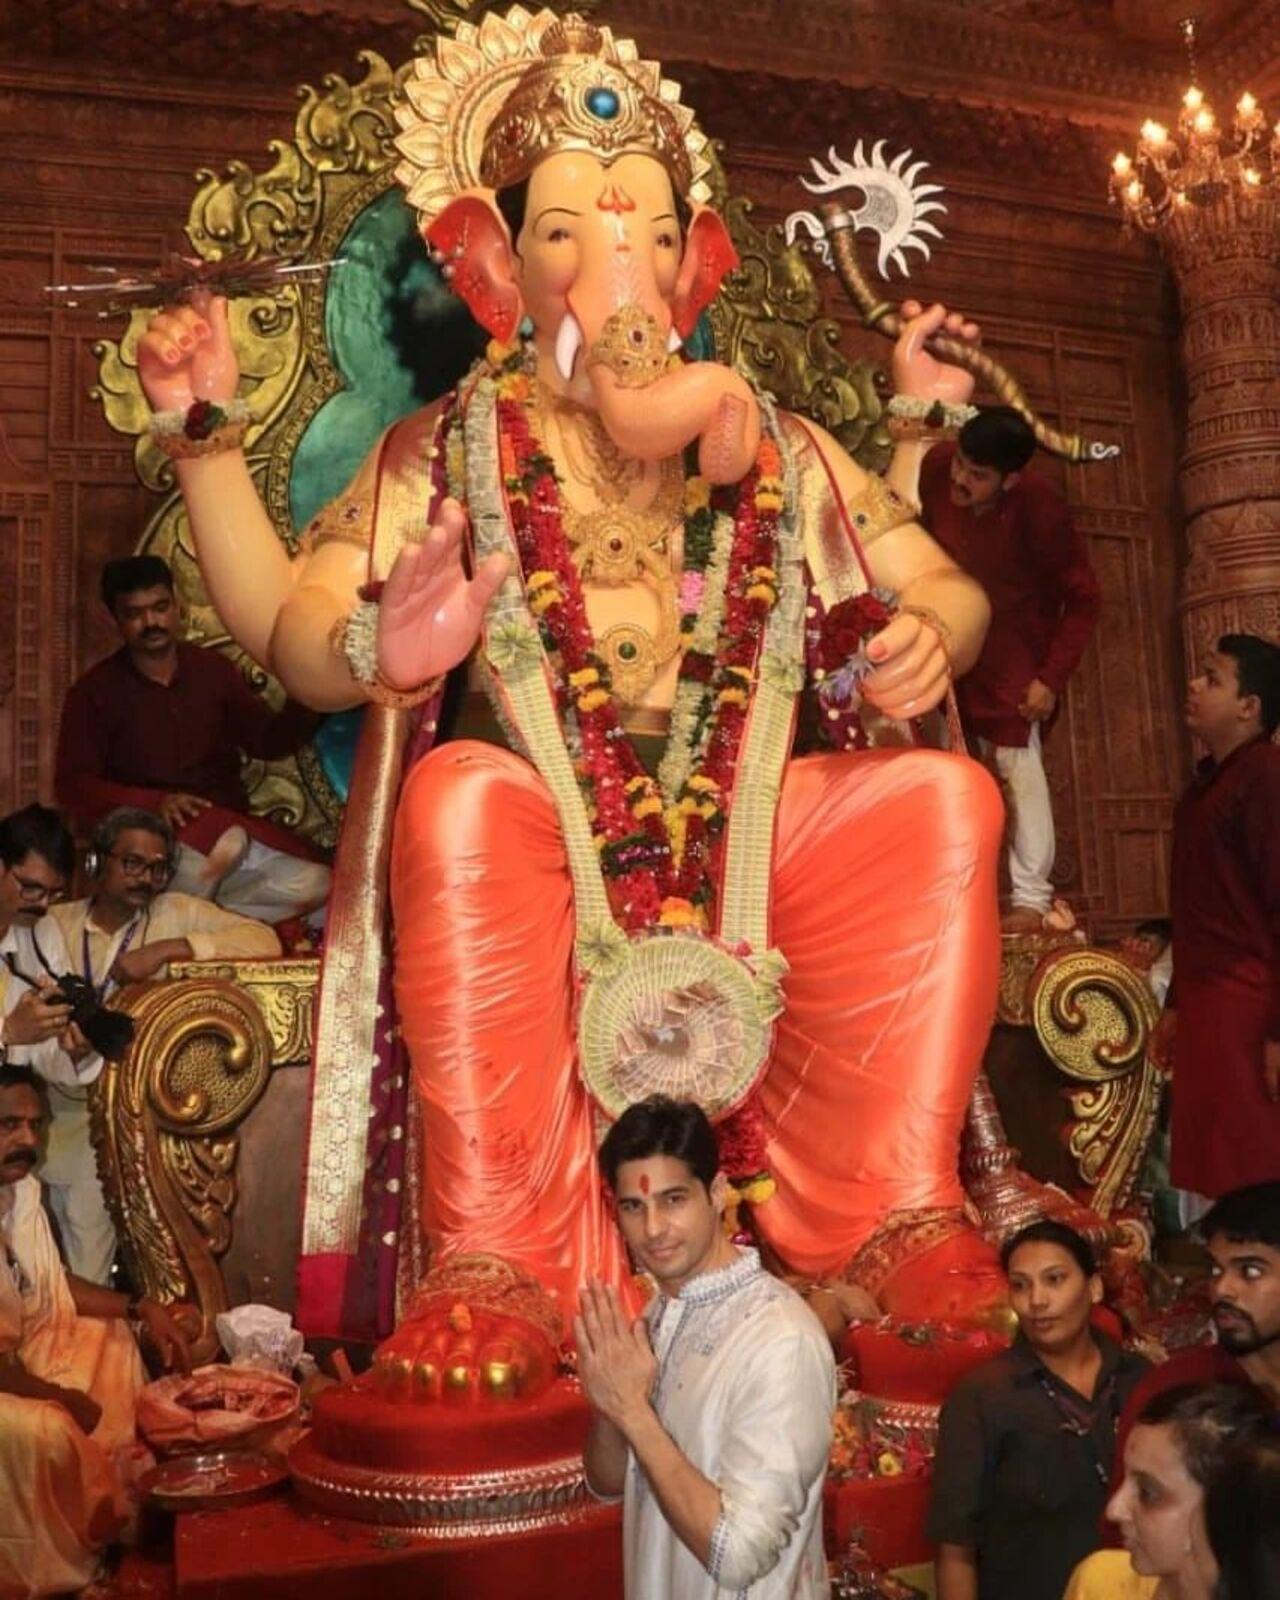 Sidharth Malhotra visited Lalbaugcha Raja with his mother in 2022. The actor sought blessings of the lord at the pandal